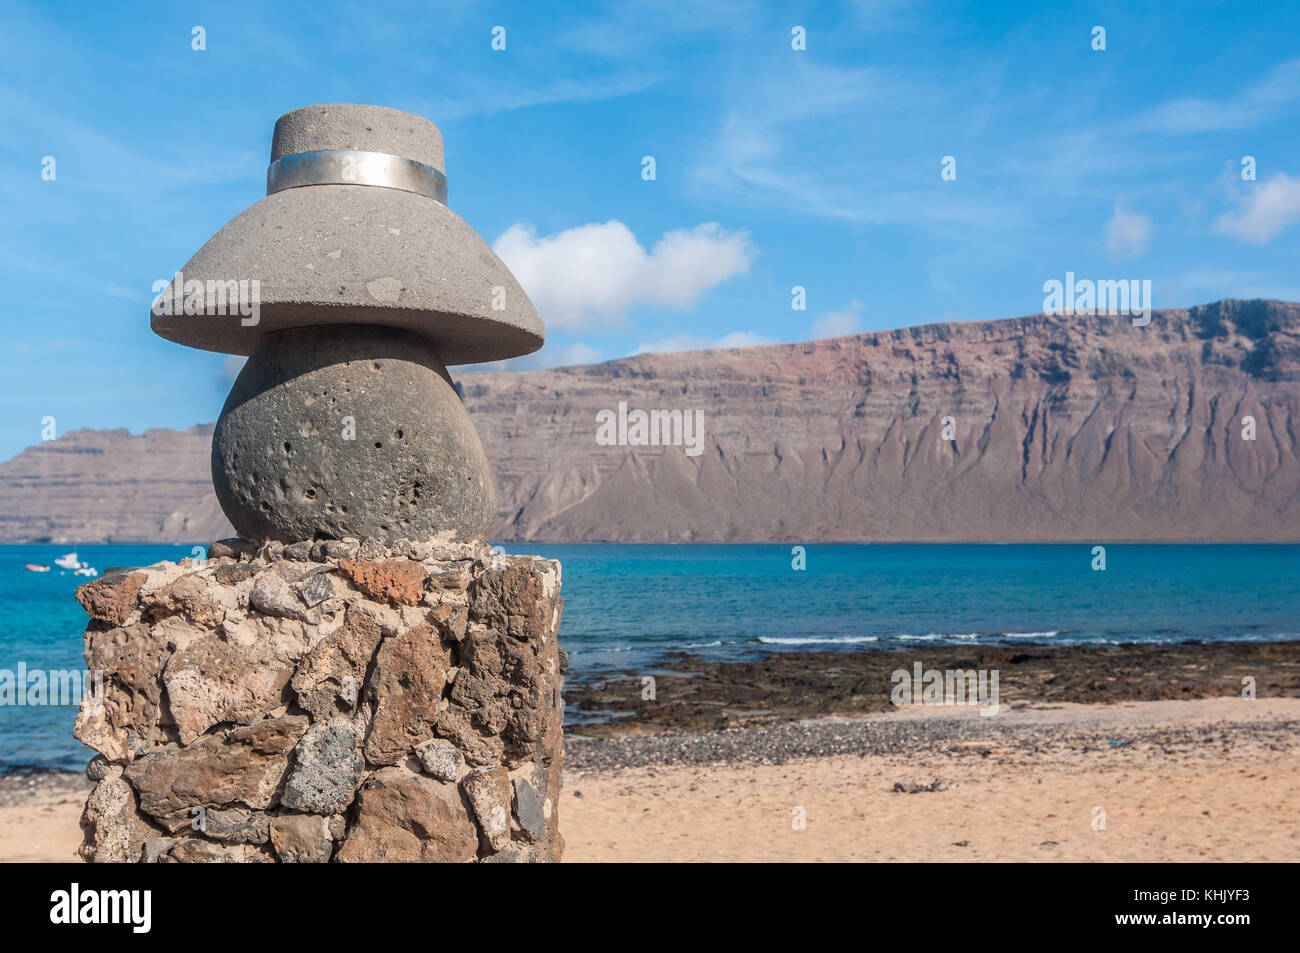 view of a typical street with a stone statue of a typical hat in the foreground and the beach in the background, La Graciosa, Canary Islands, Spain Stock Photo